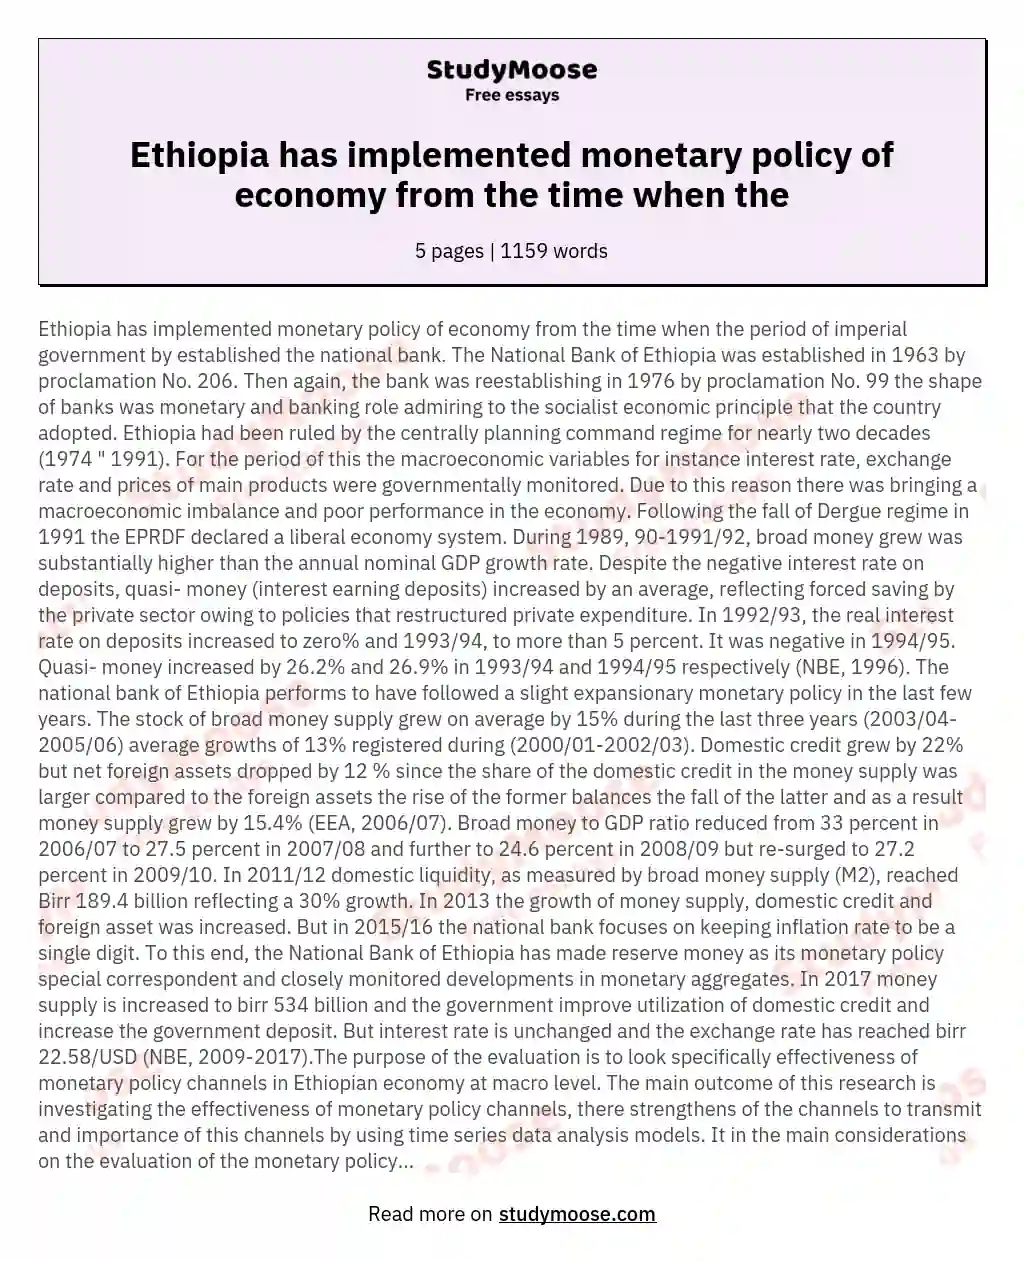 Ethiopia has implemented monetary policy of economy from the time when the